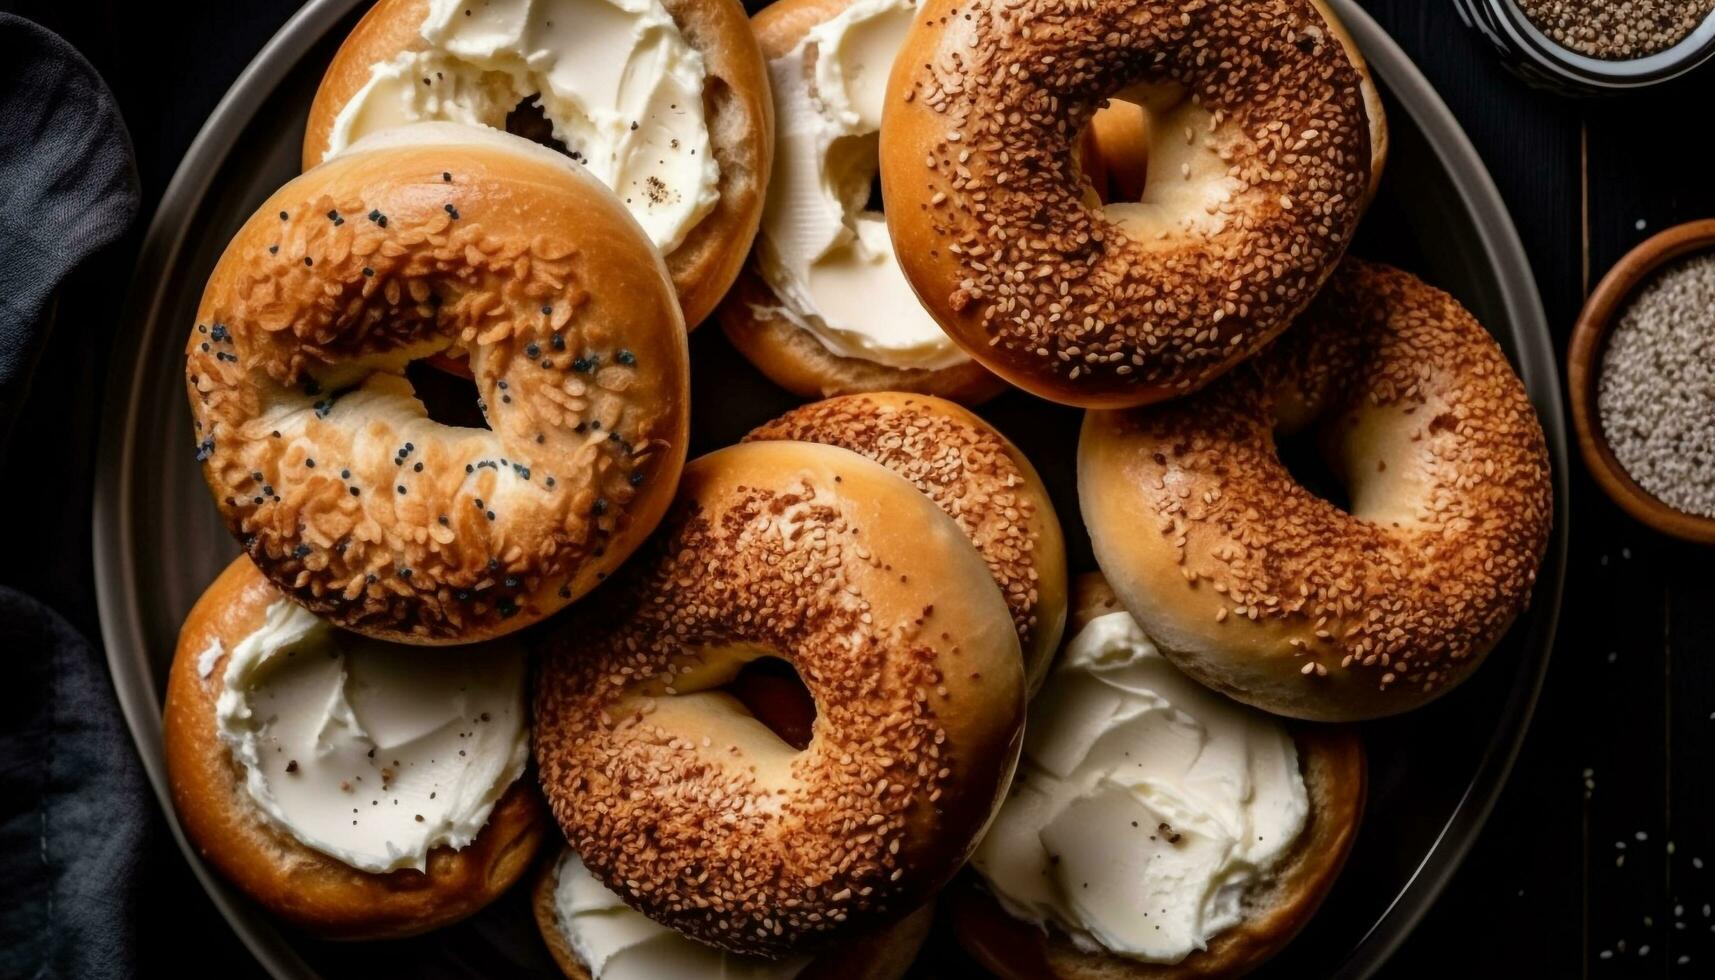 Freshly baked bagels with sesame seeds, gourmet delight generated by AI photo